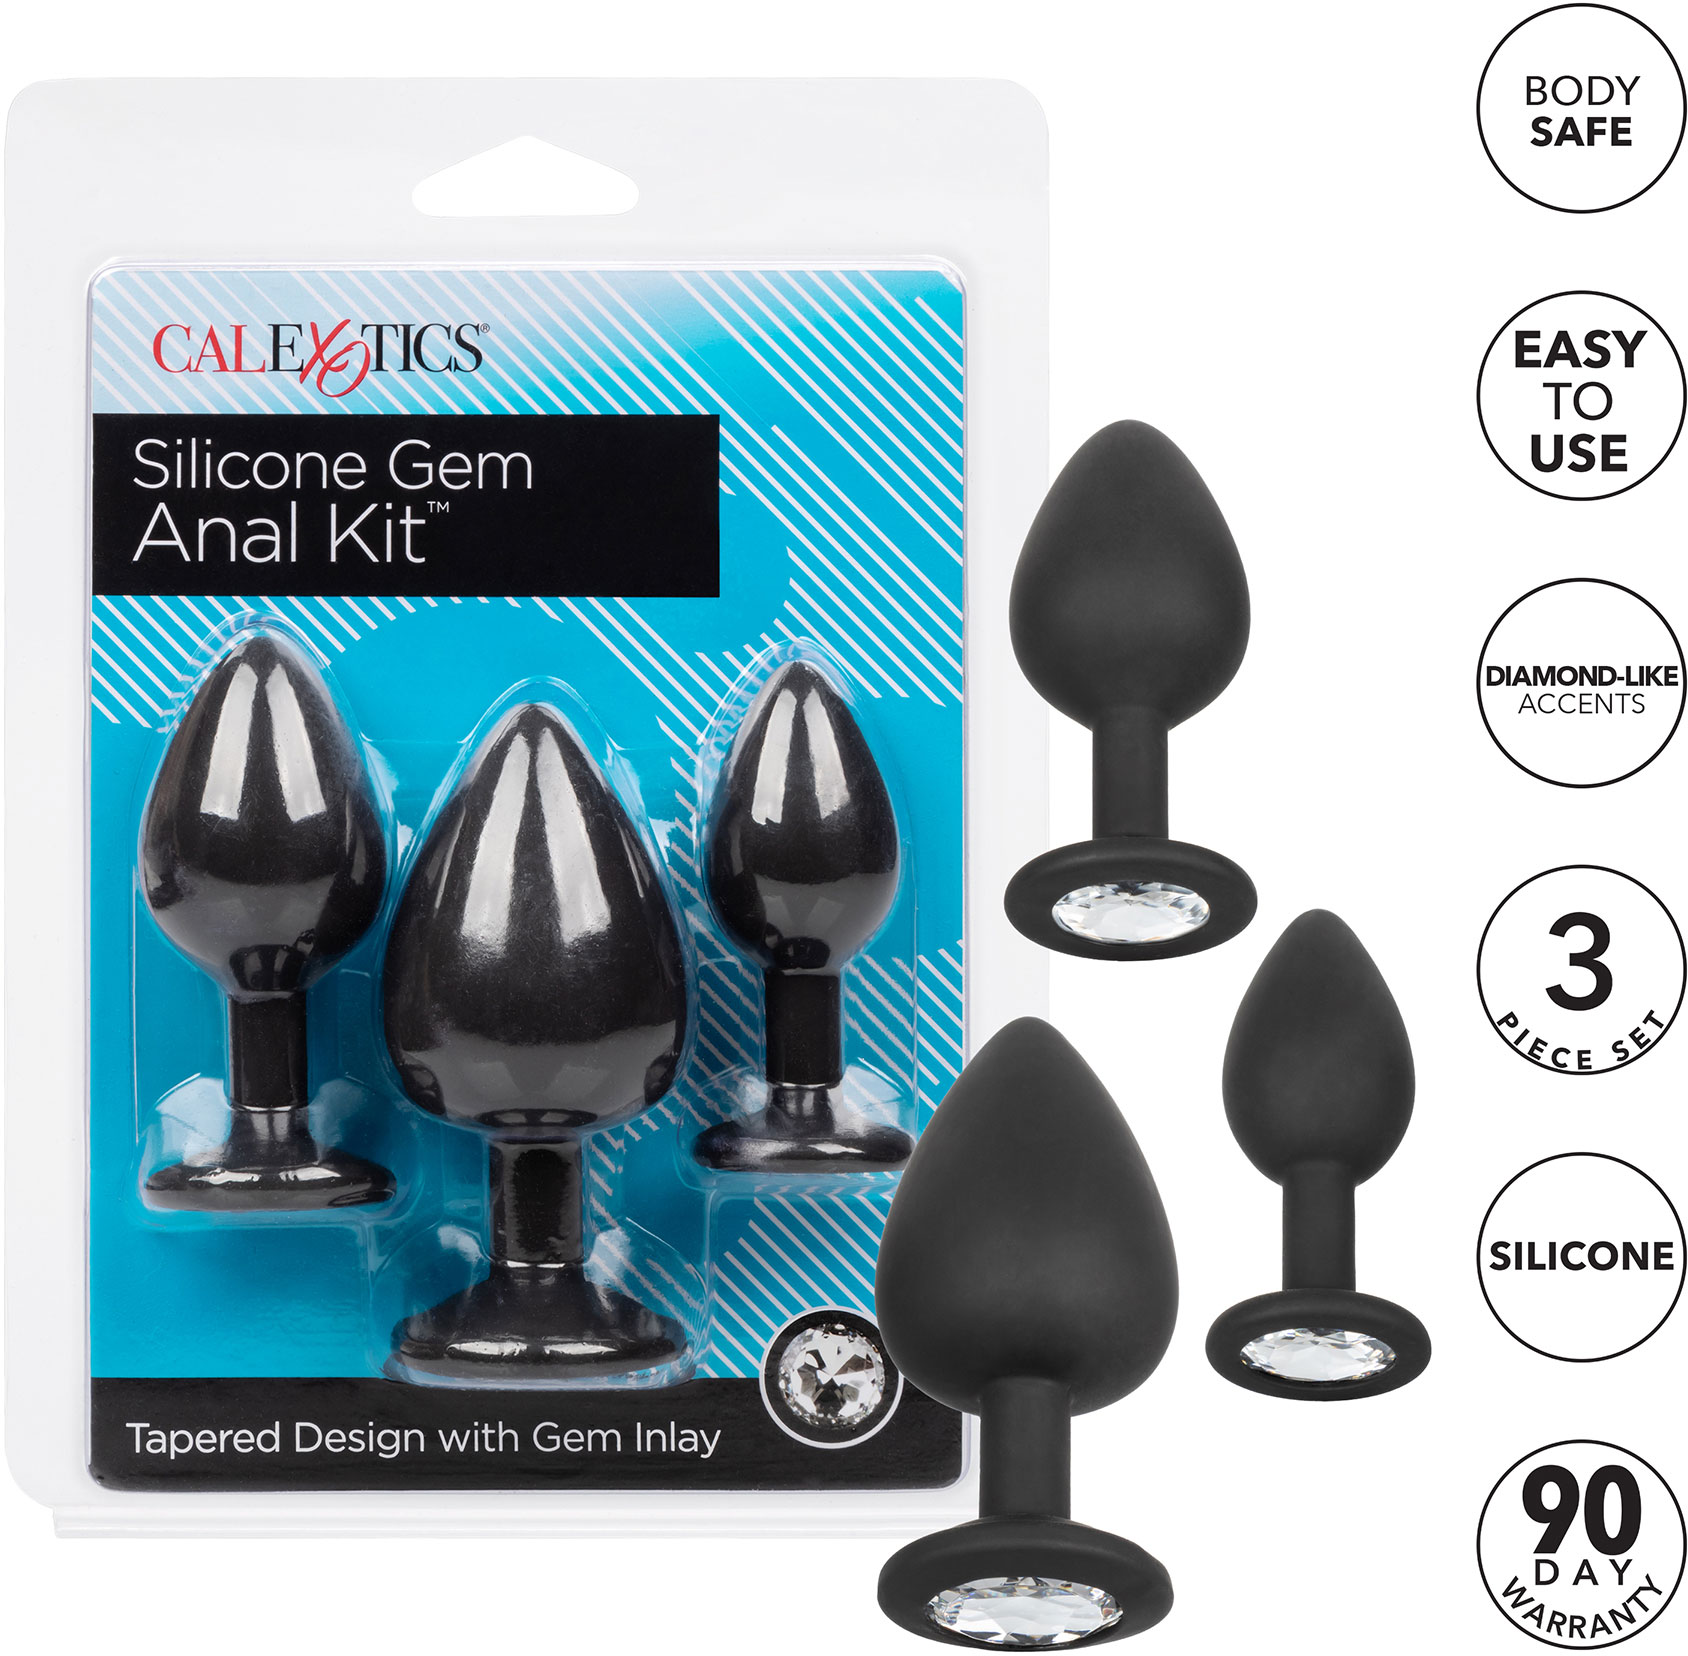 Silicone Gem Anal Kit With Three Jeweled Plugs - Features